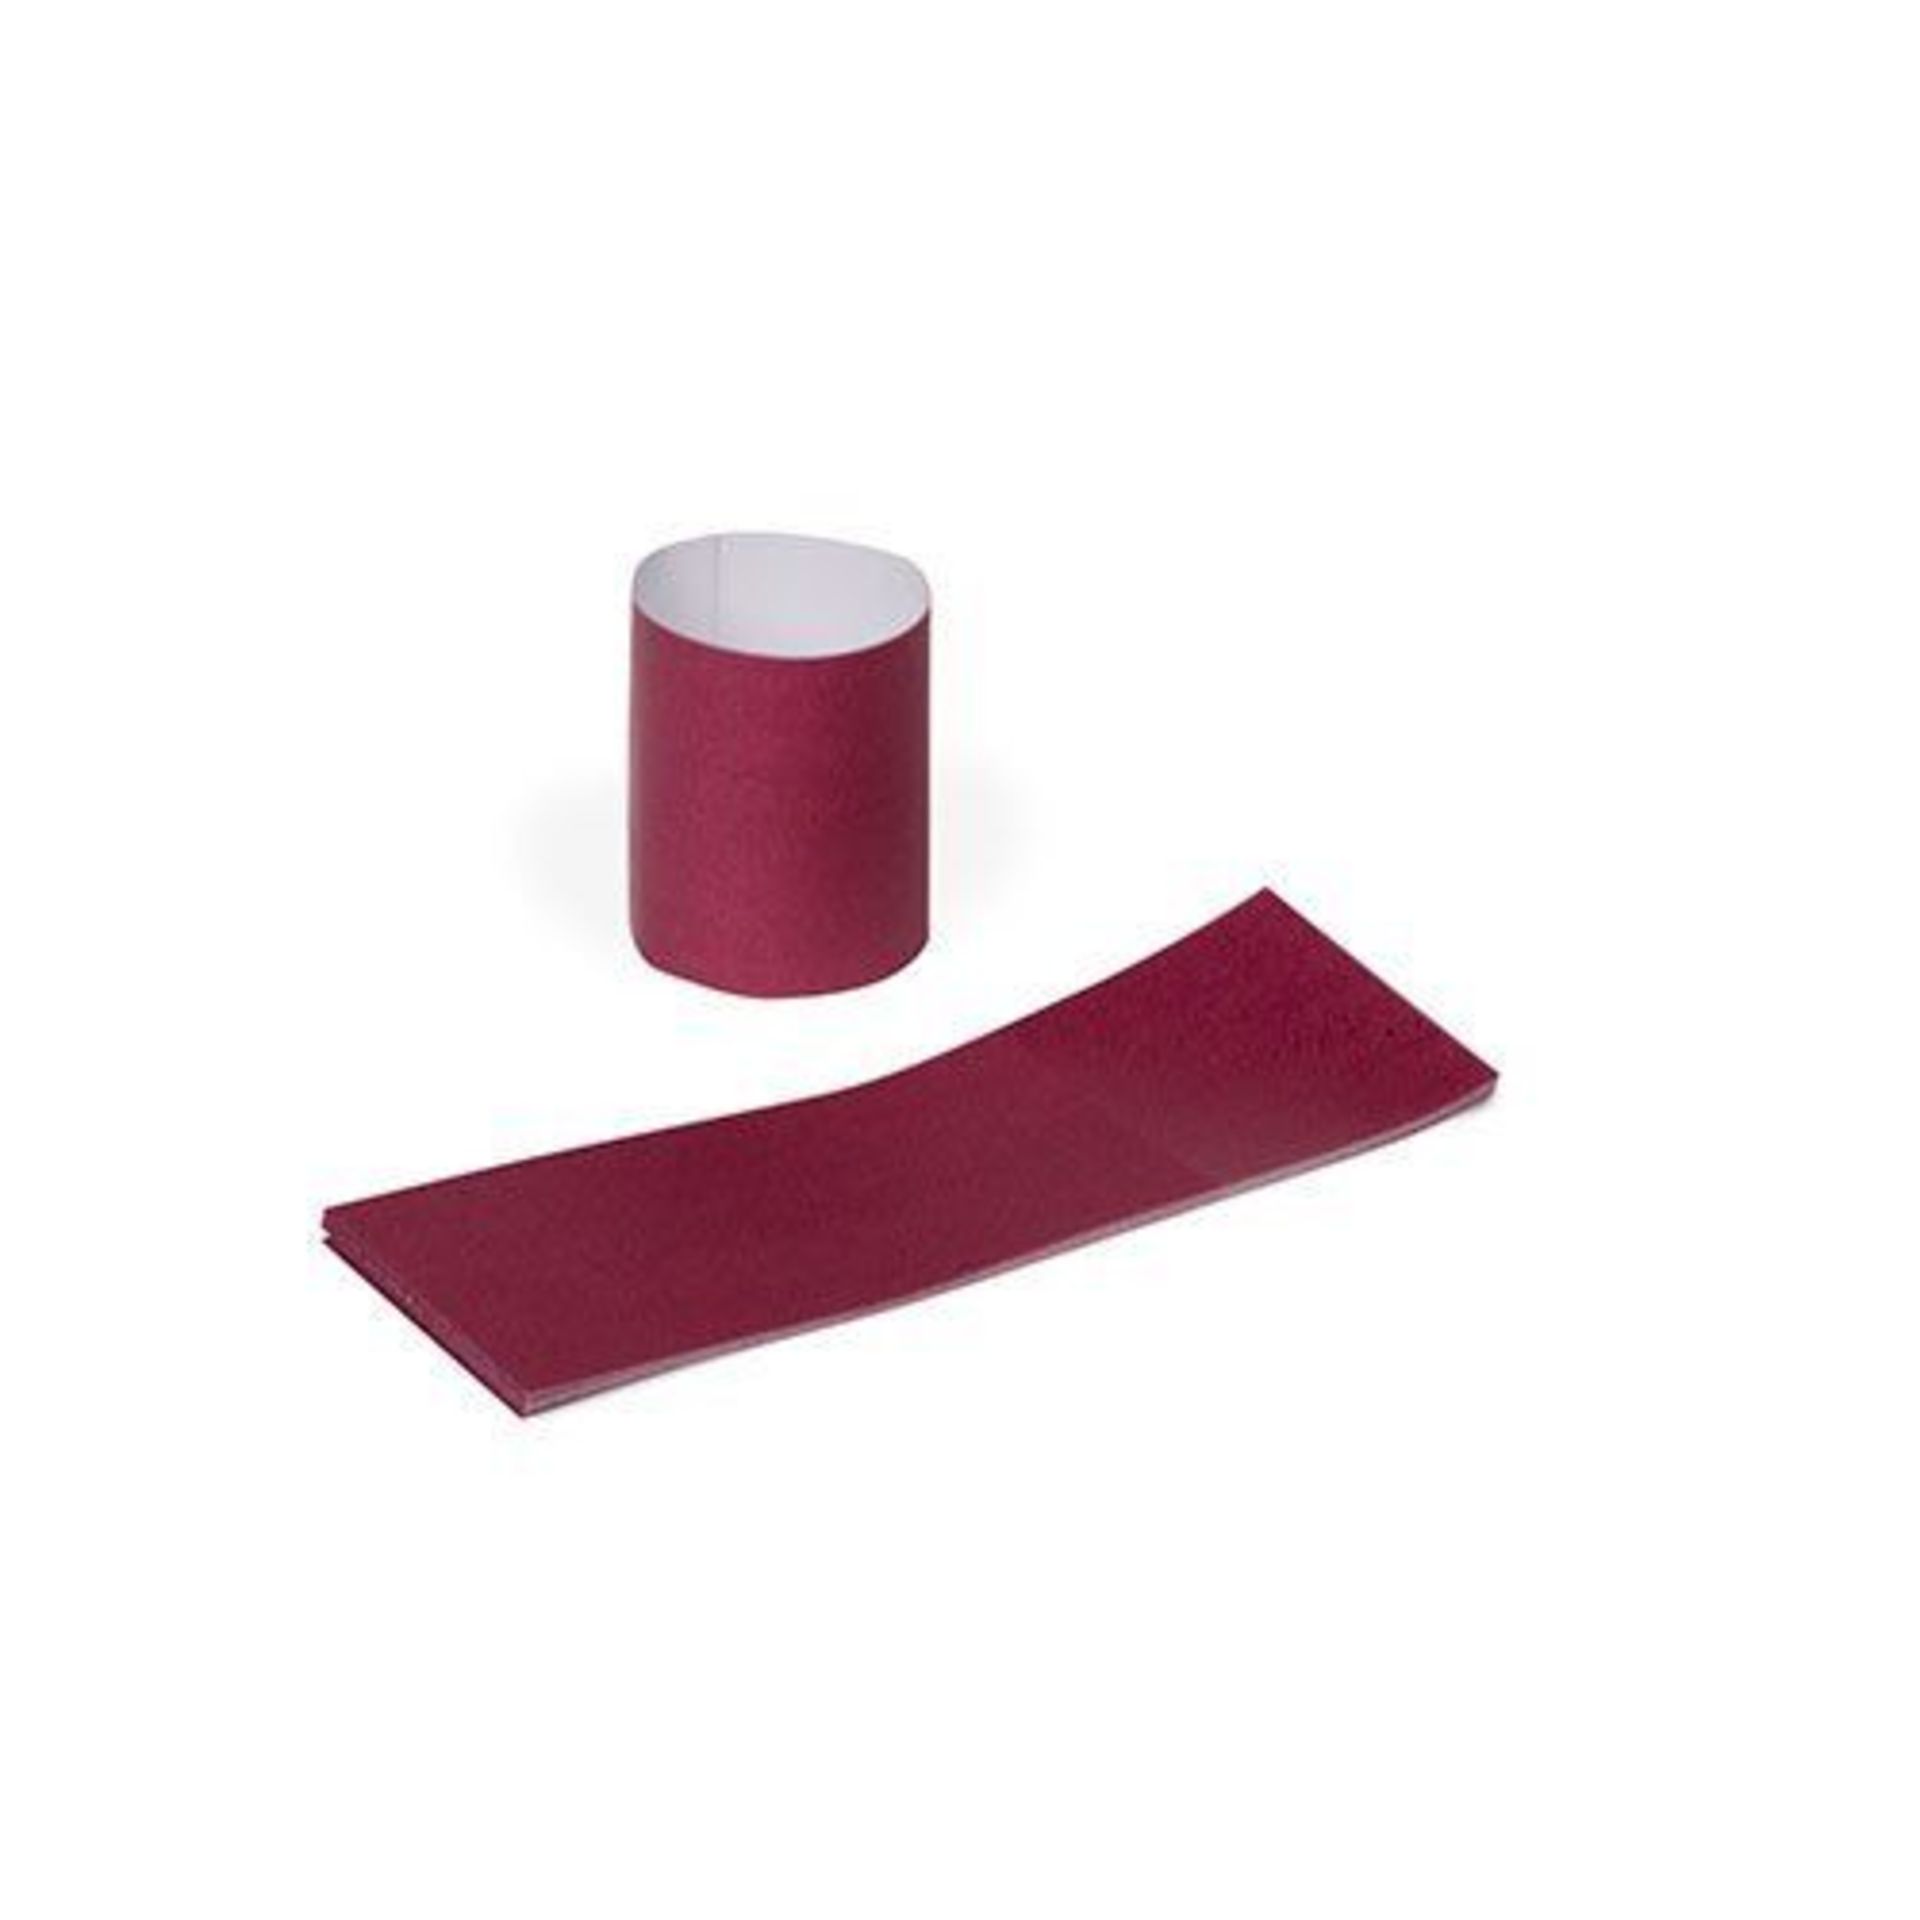 12,500 x Burgundy Royal Napkin Bands - Includes 5 x Boxes of 2,500 - Product Code RNB20MN - Brand - Image 2 of 4